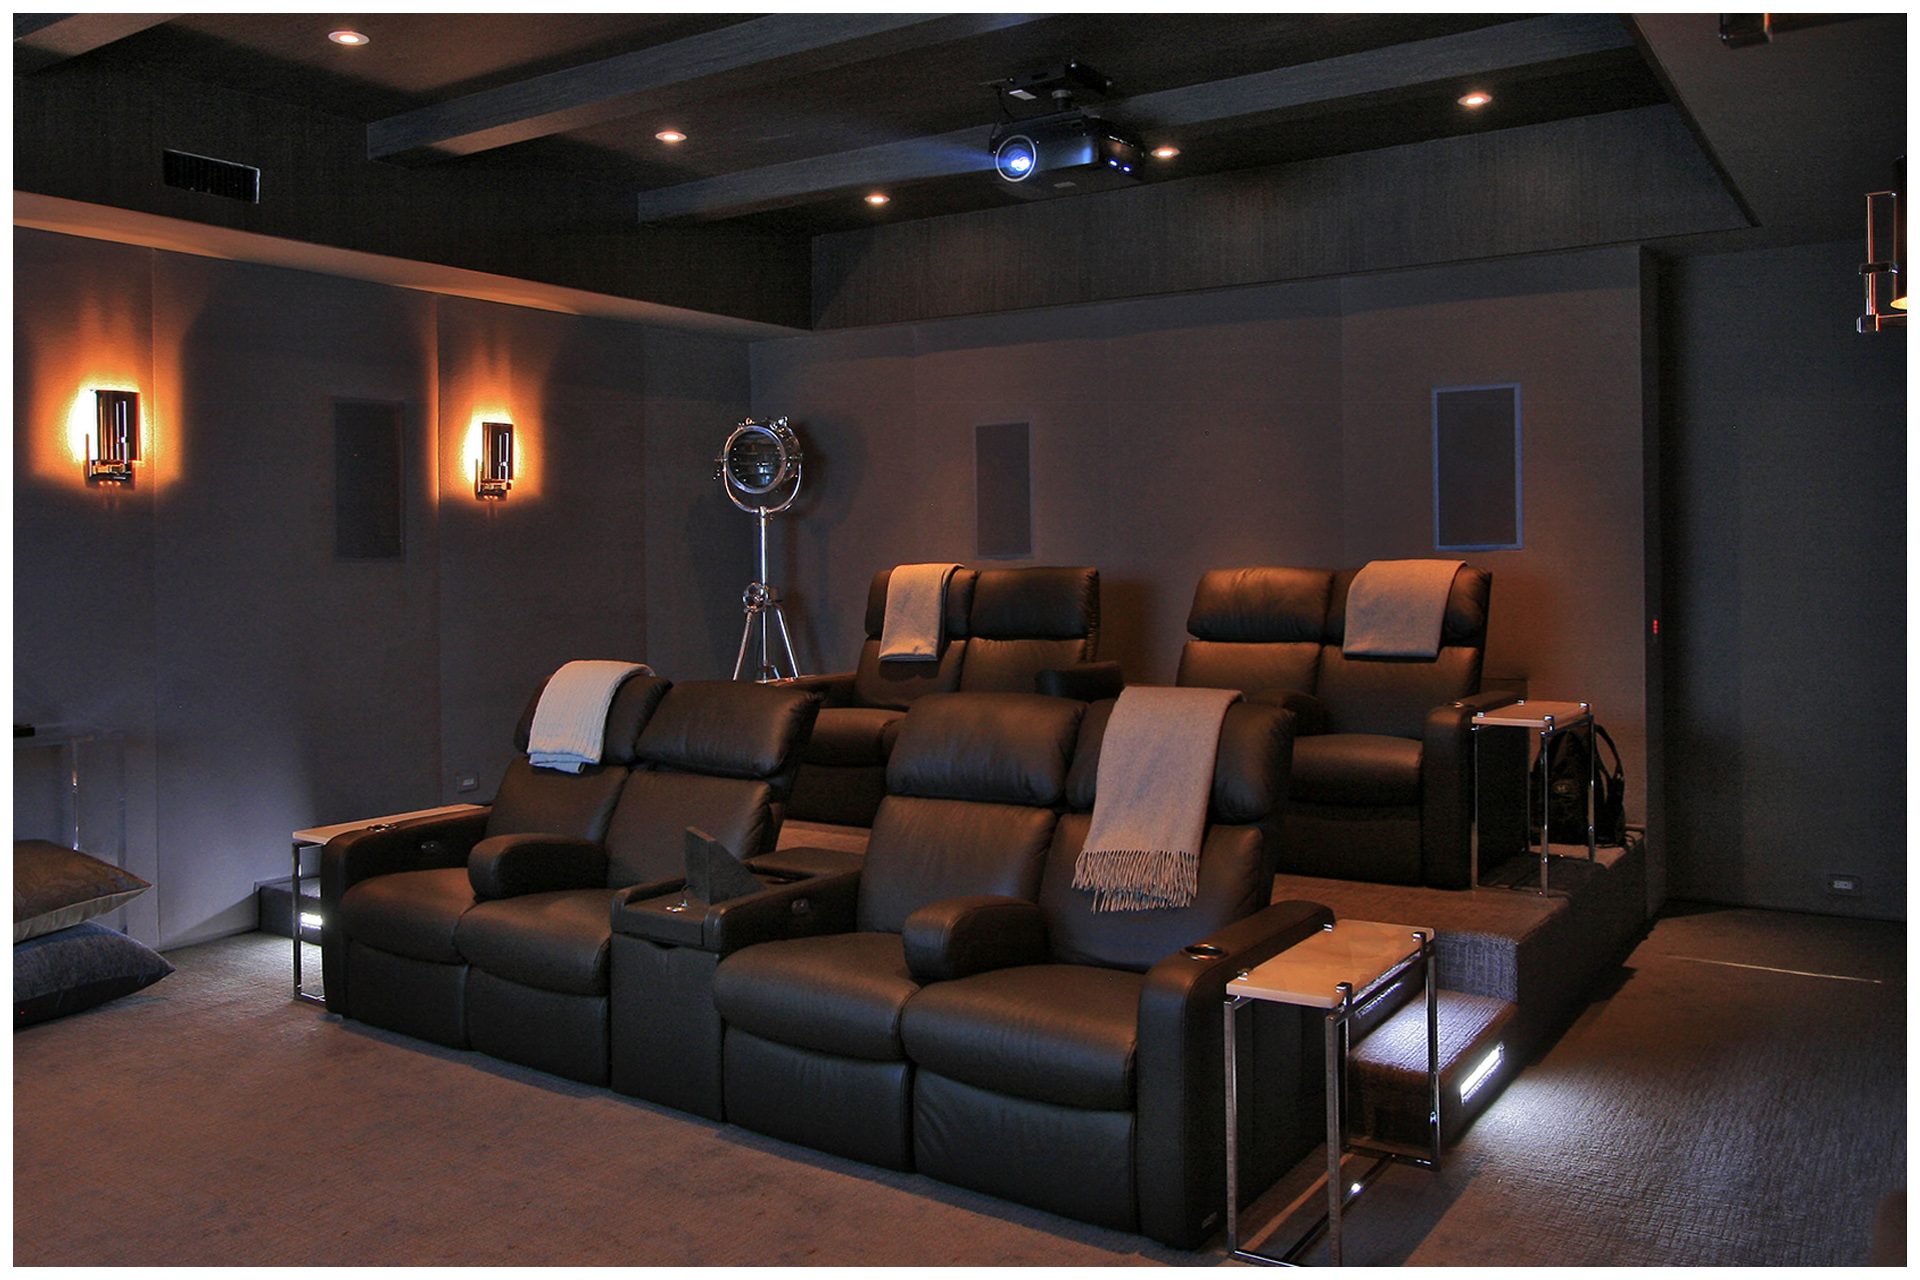 THEATER IN A DEDICATED ROOMThe before and after picture illustrate how two interconnected rooms in a finished basement were joined and subsequently turned into a dedicated basement theater.Special treatment of the ceiling limited intrusion of sound into upper floor.